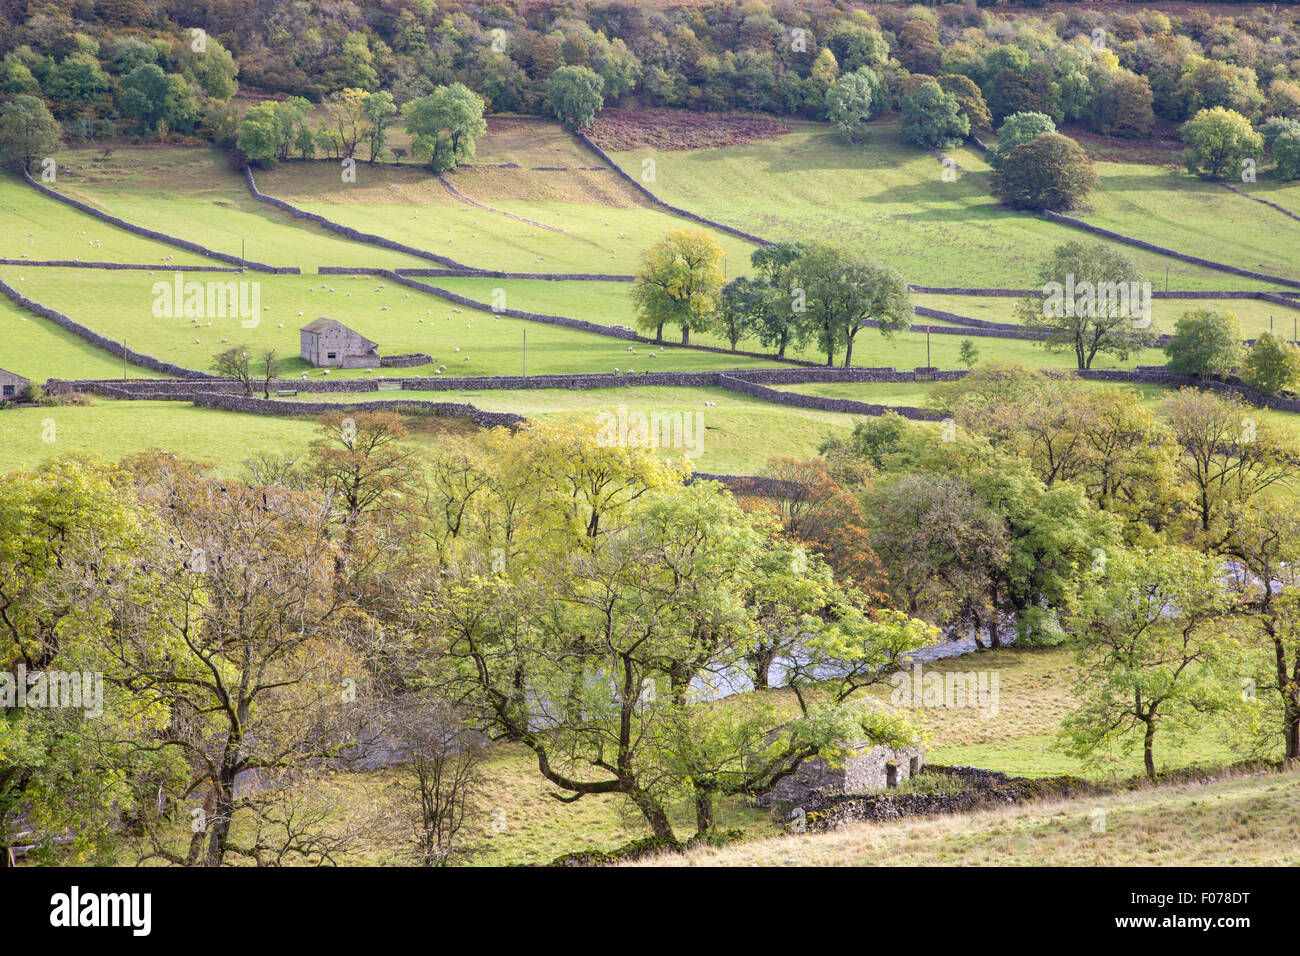 Farming field systems in Upper Wharfdale, ' Yorkshire Dales National Park, England, UK Stock Photo